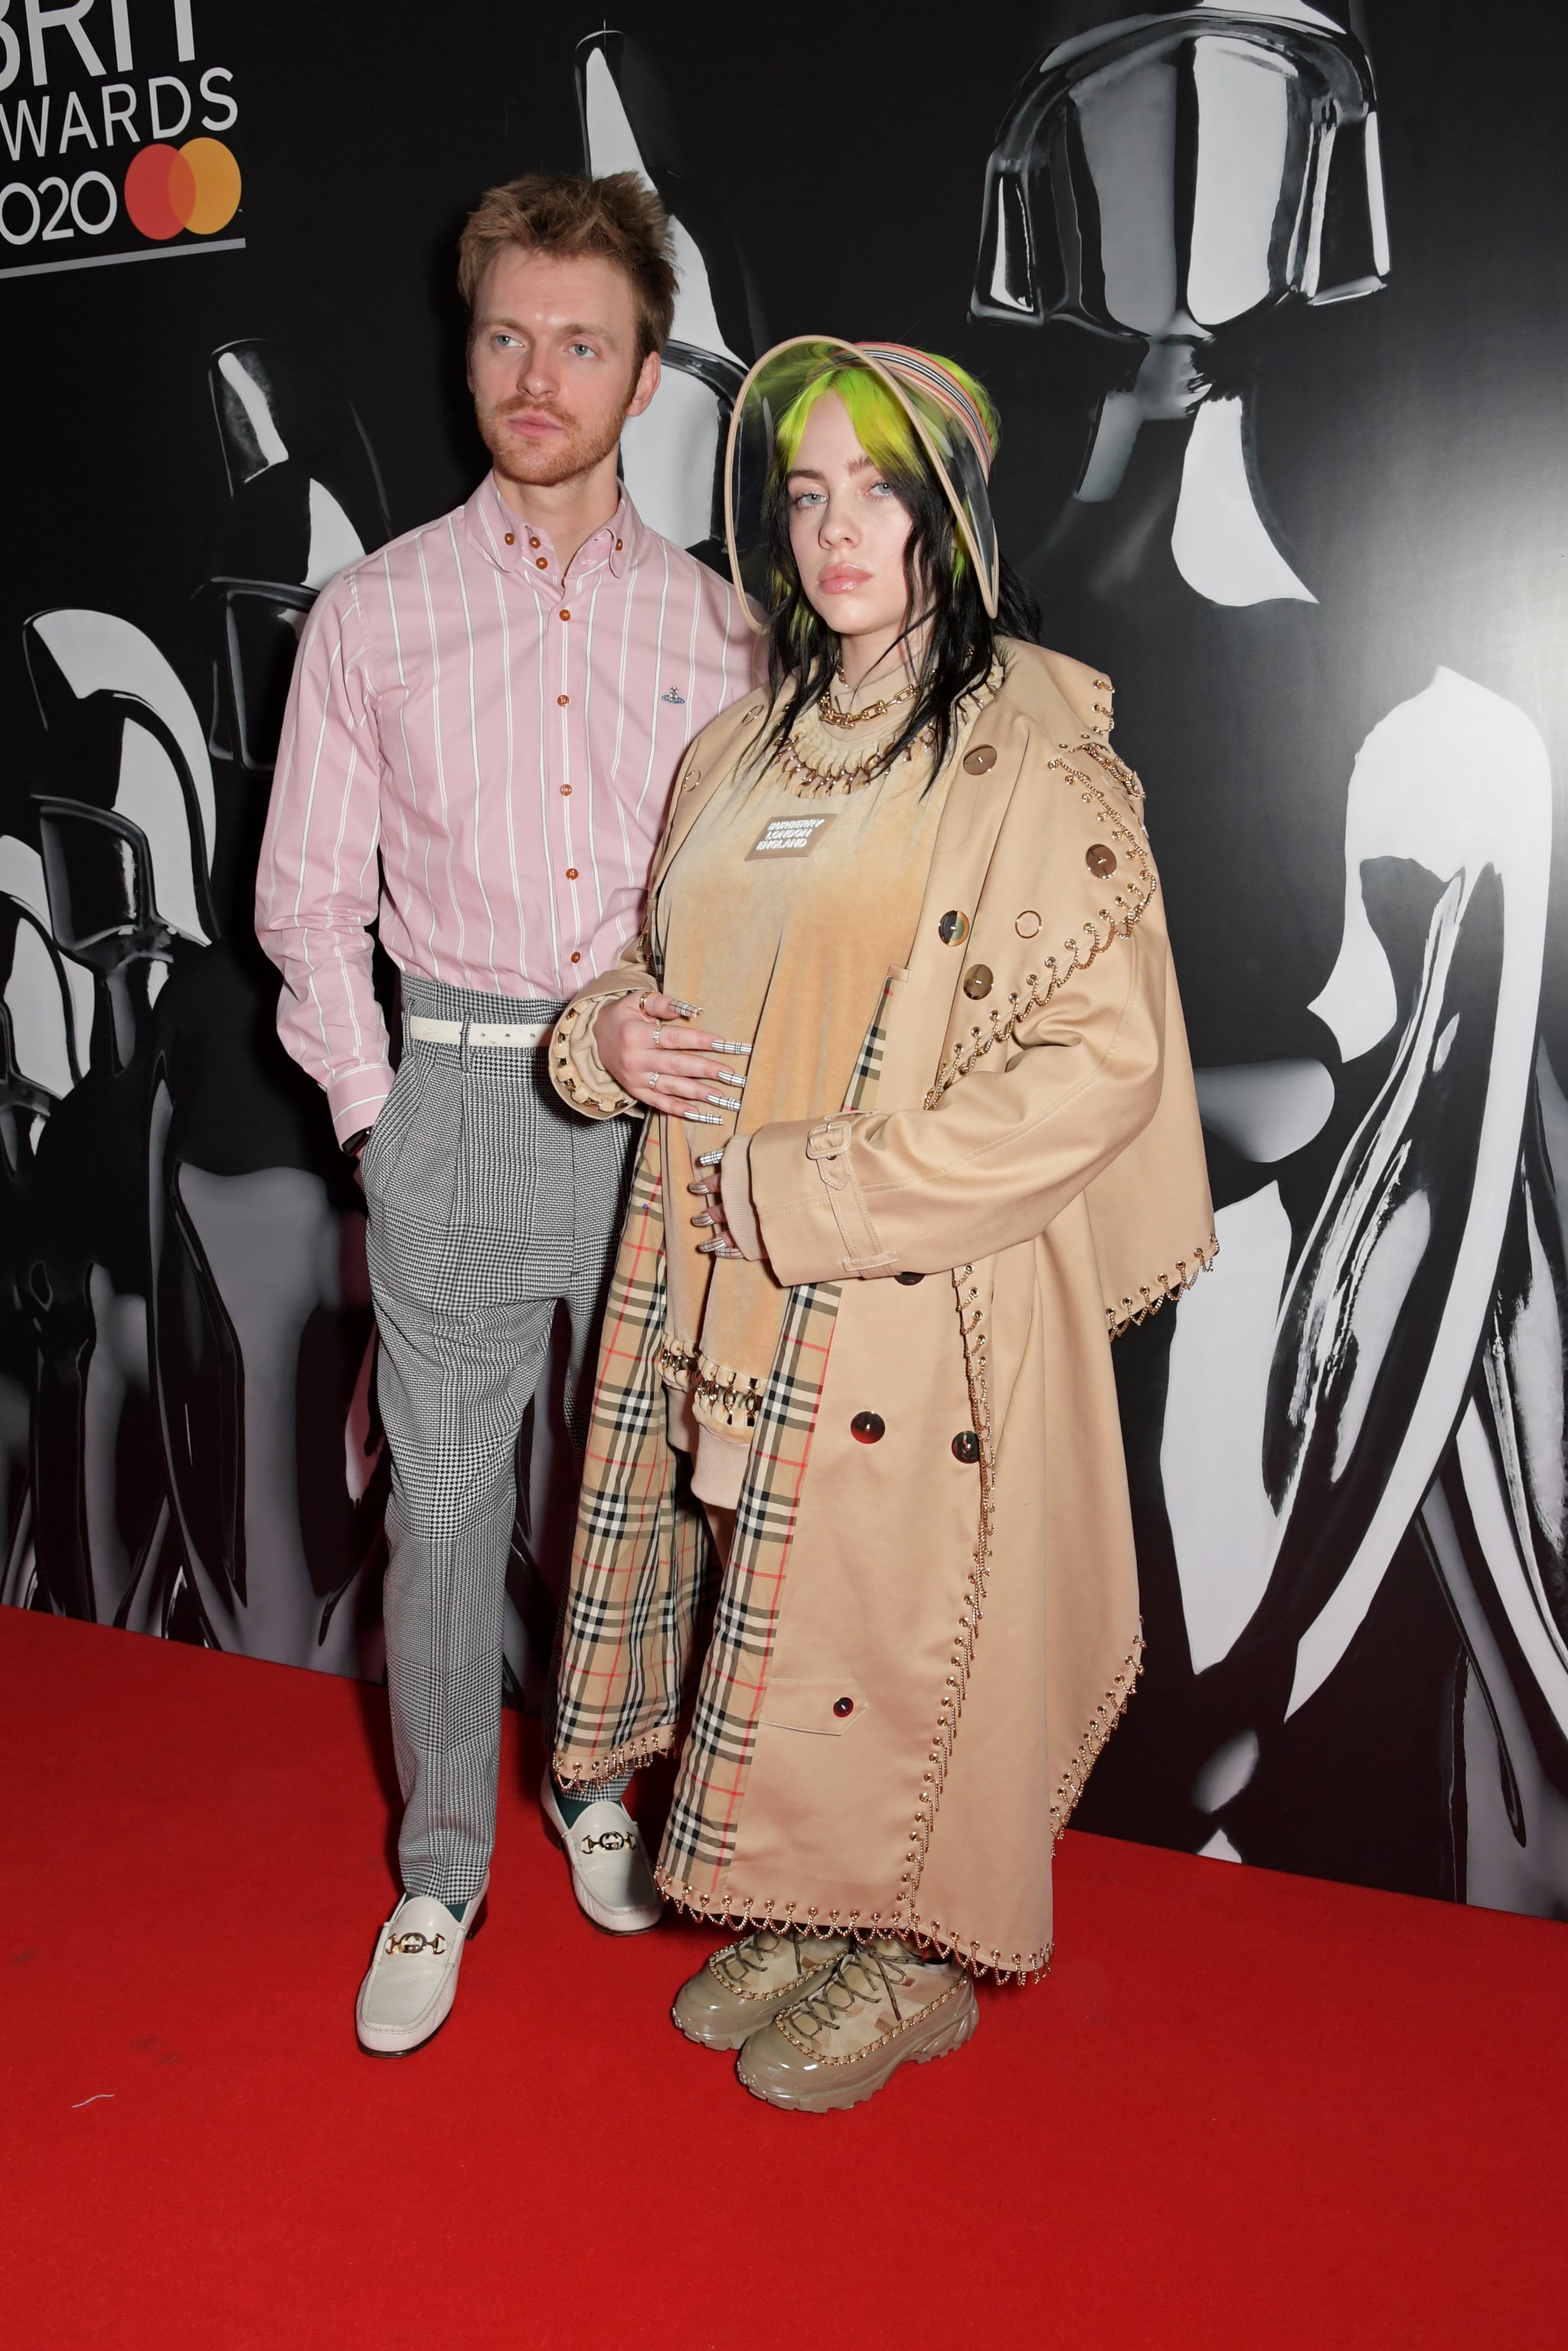 11 of Billie Eilish's most memorable outfits, from Burberry